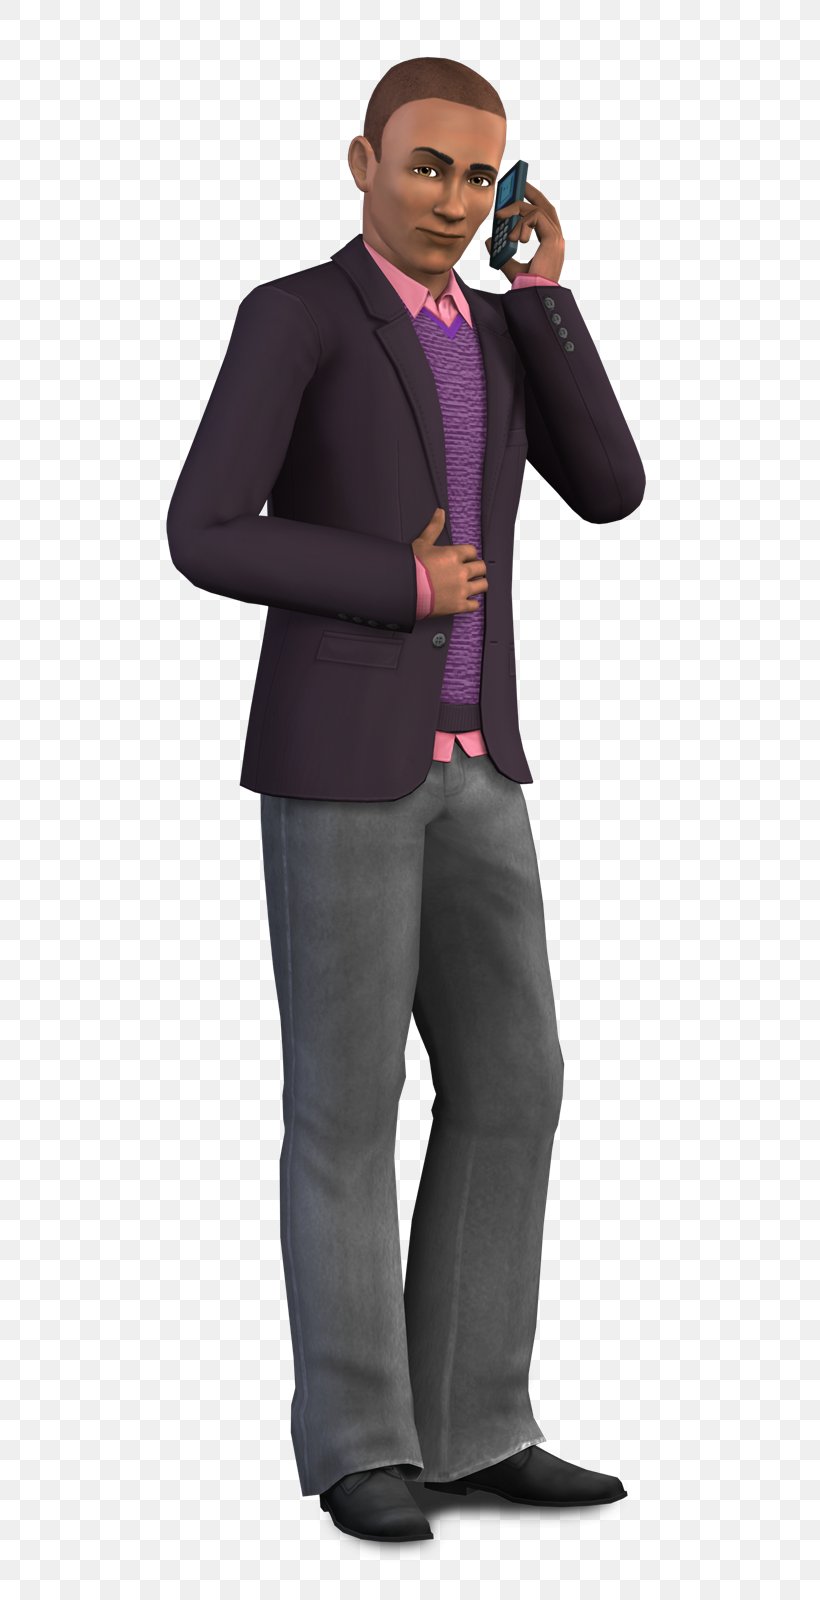 The Sims 3: Late Night The Sims 4 The Sims 2 Rendering, PNG, 726x1600px, Sims 3 Late Night, Blazer, Blog, Business, Businessperson Download Free